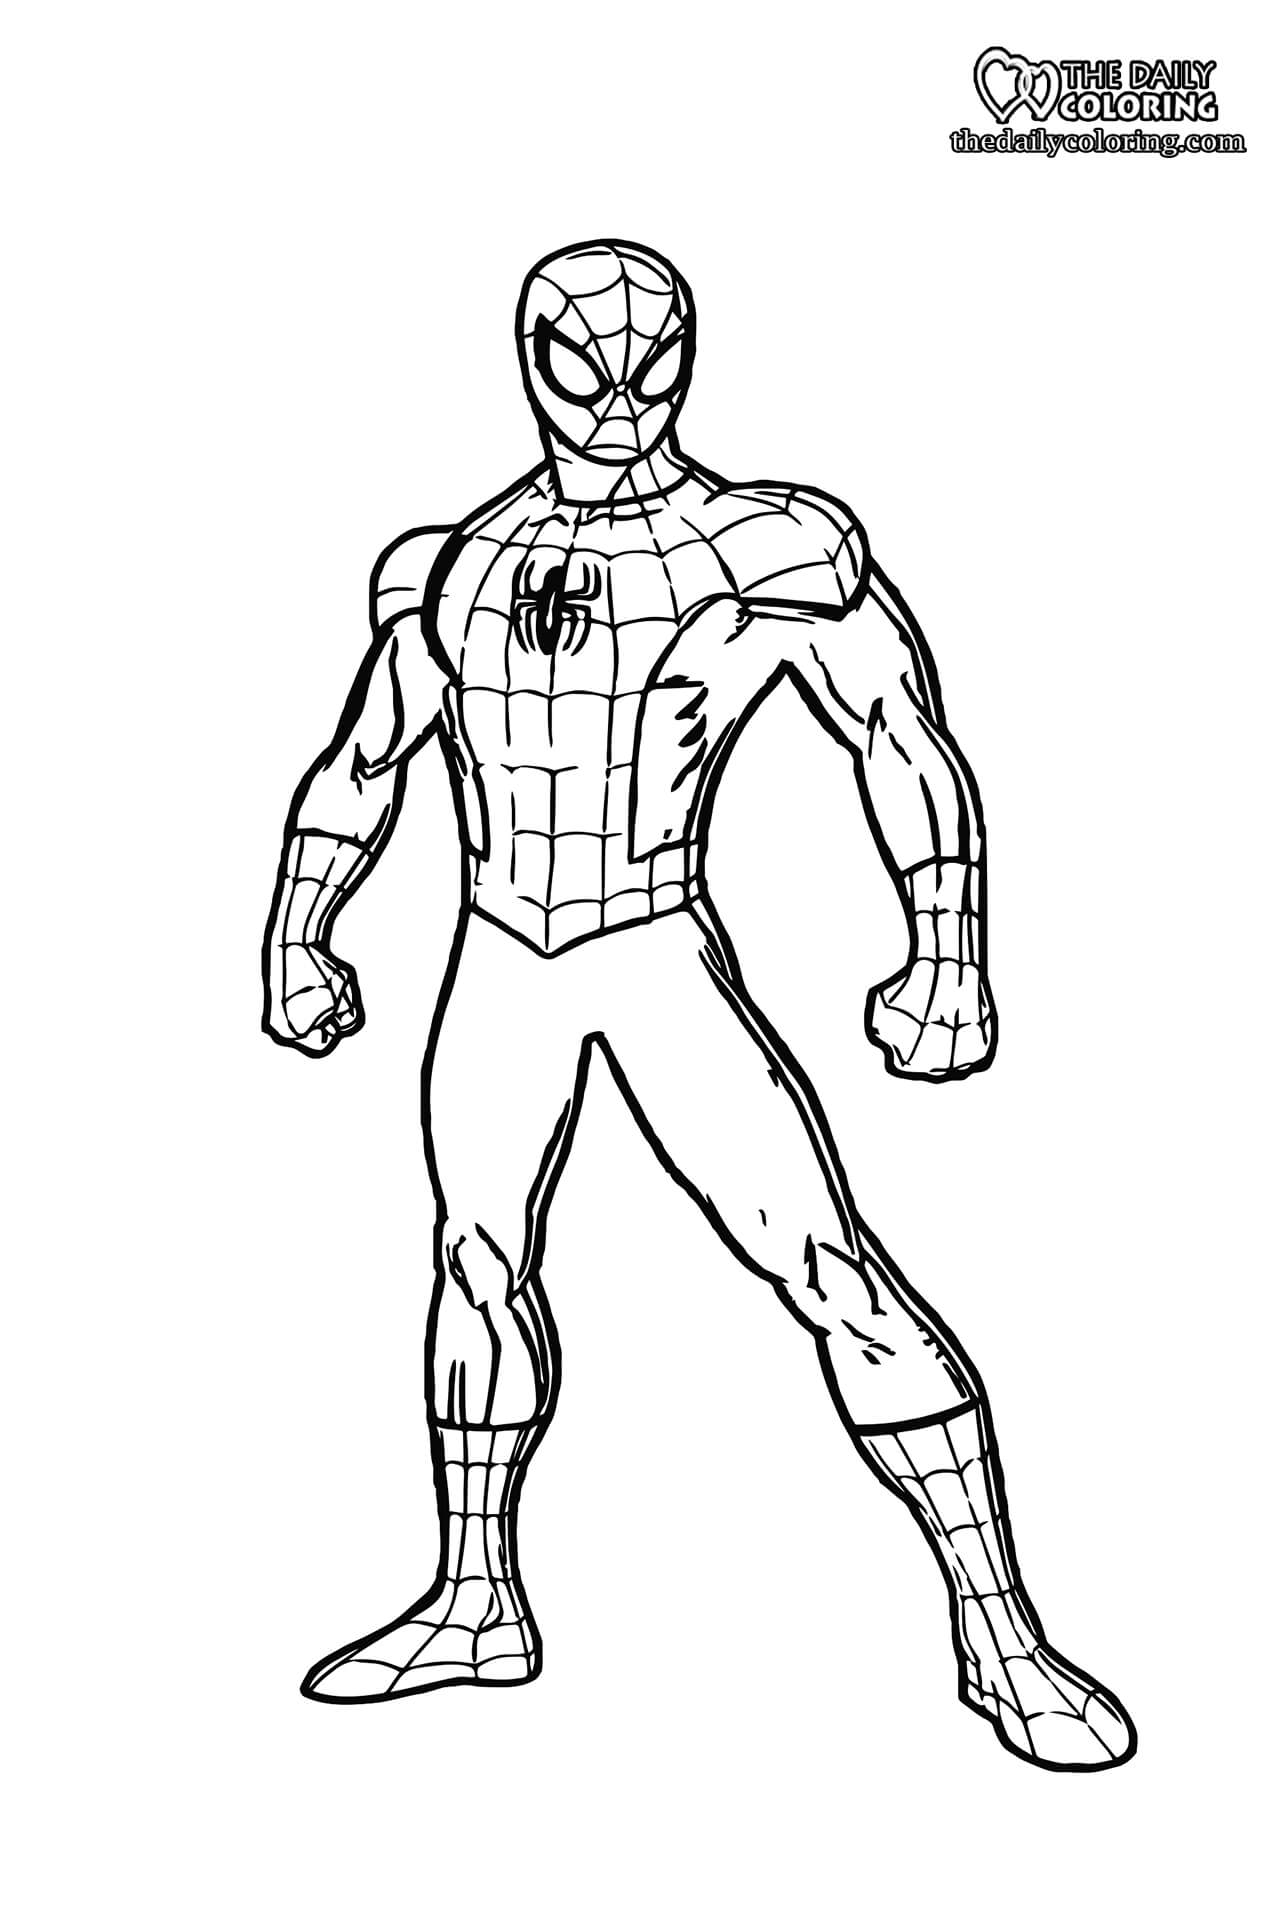 Gallery Spiderman Coloring Pages 21+ FULL HD   The Daily Coloring is free HD wallpaper.